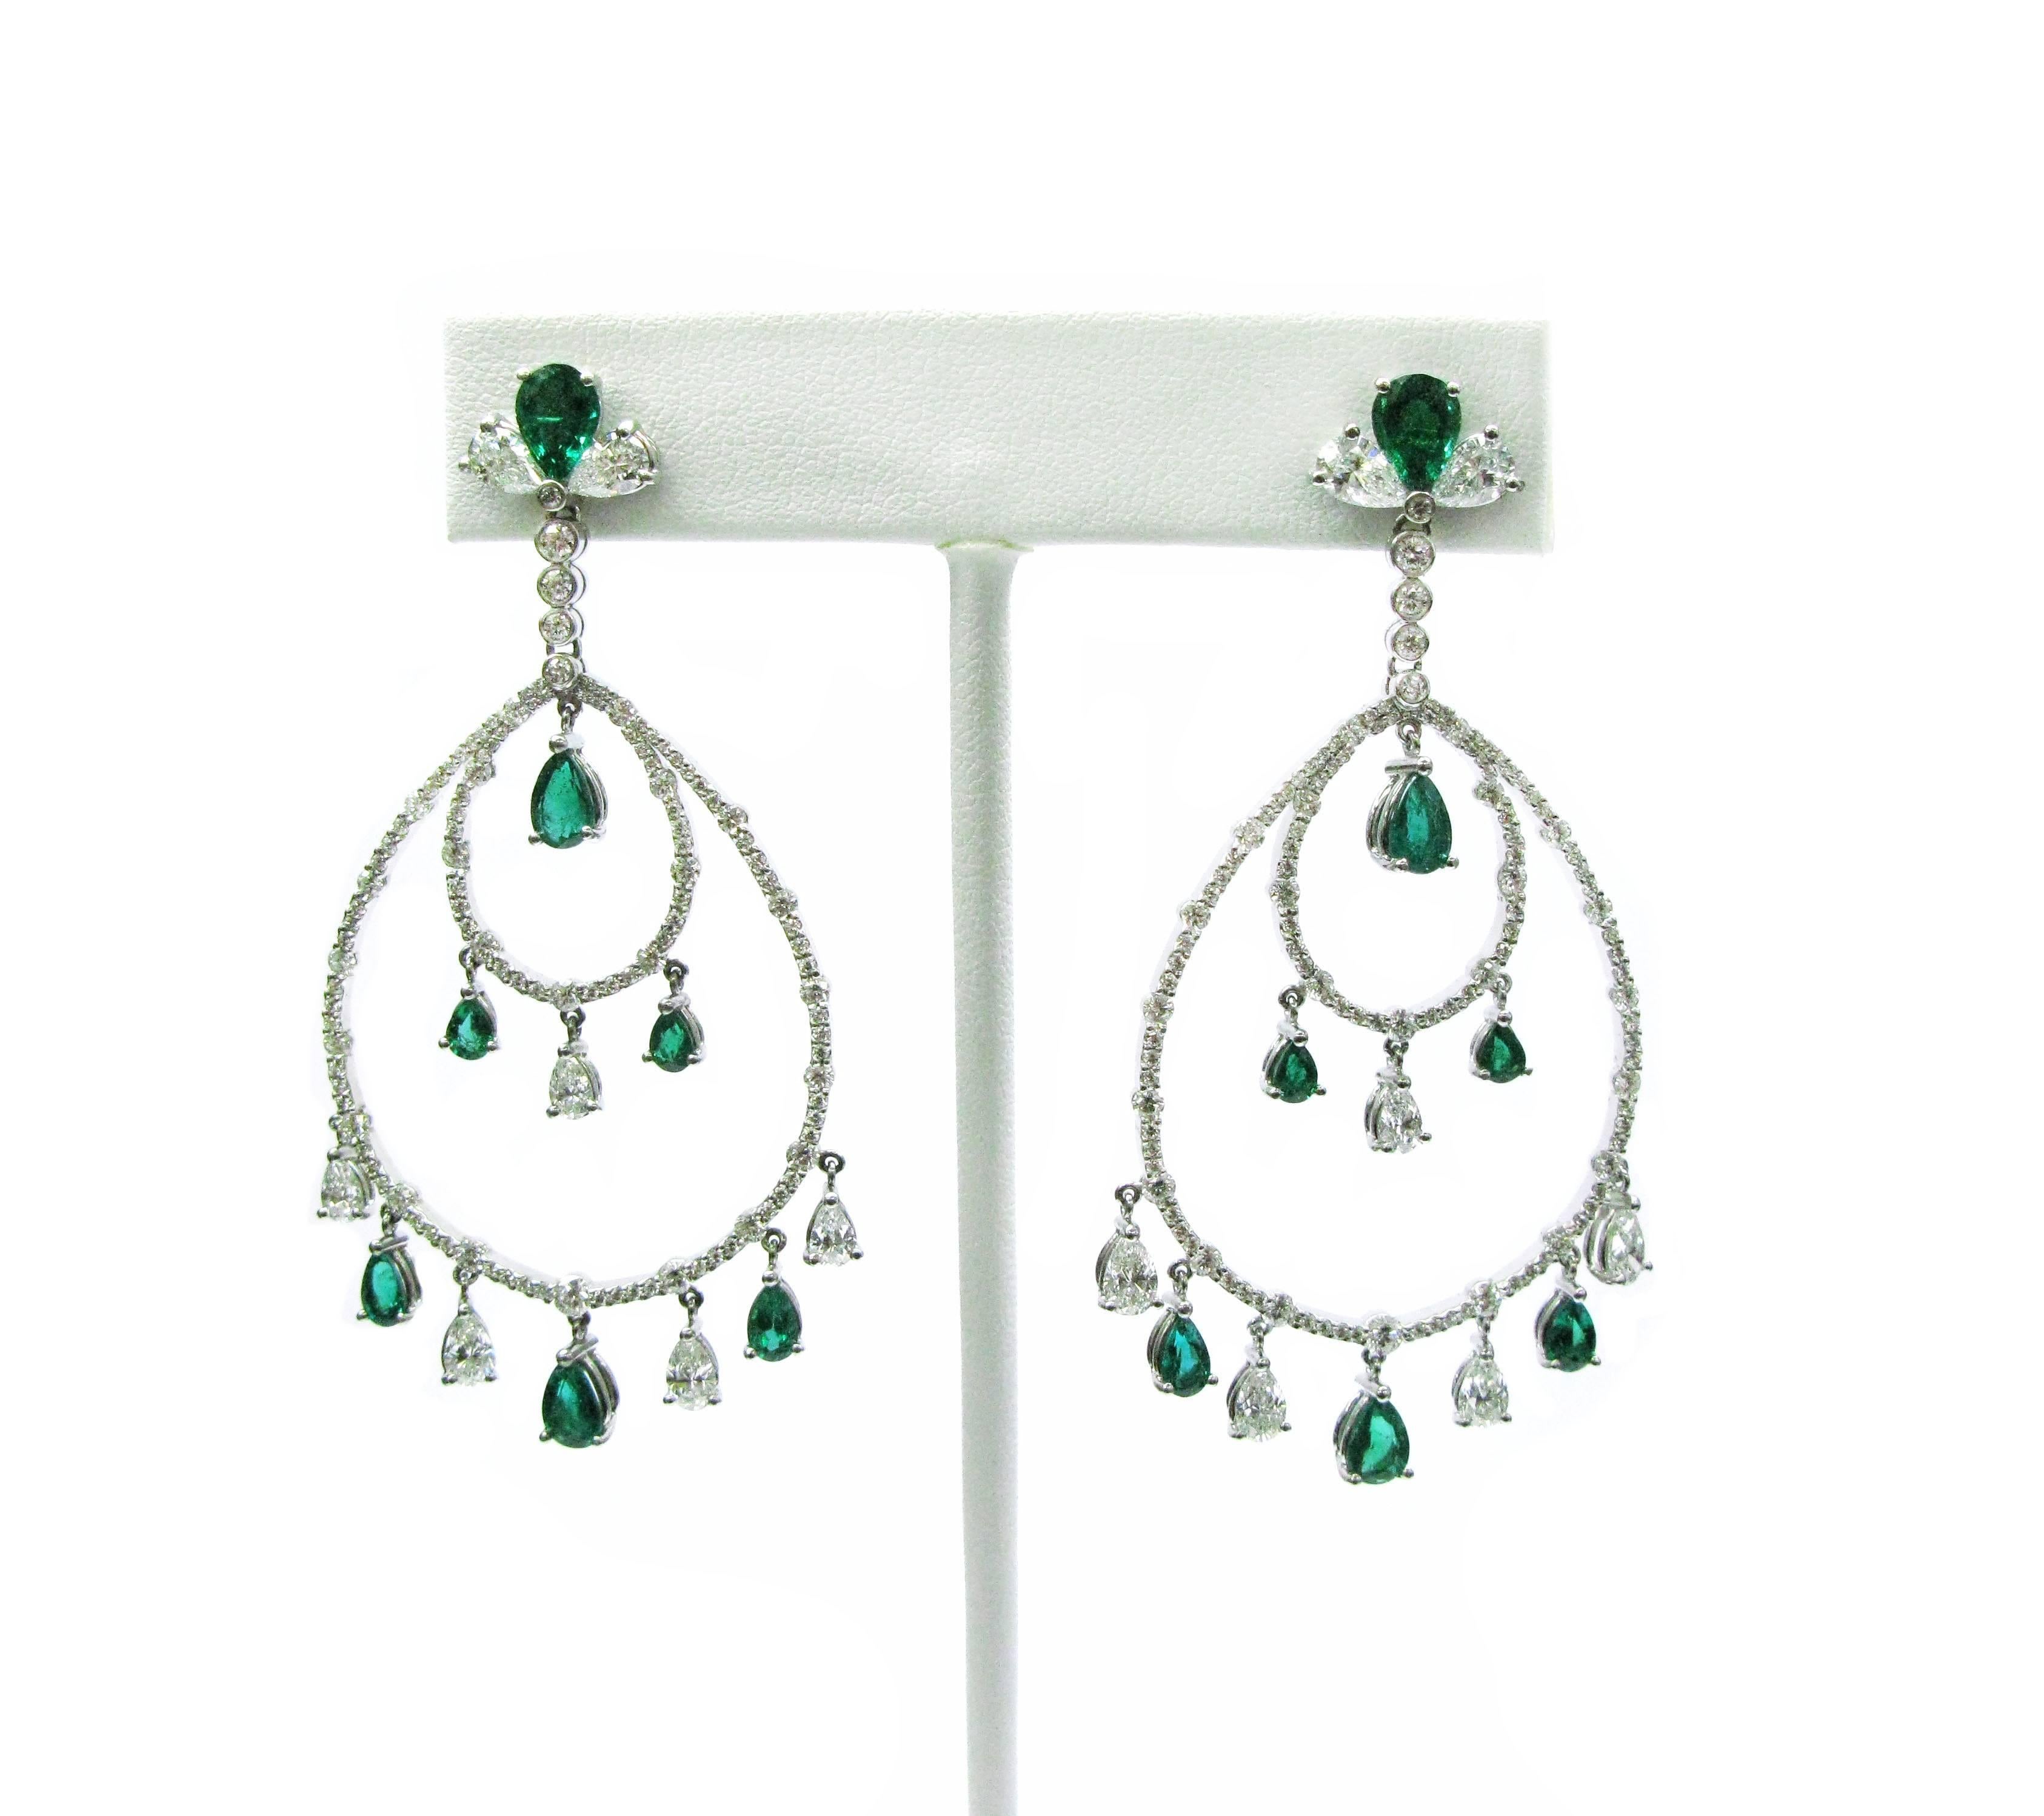 These stunning emerald and diamond chandelier earrings are the epitome of class and elegance. They contain 5.15cts of white diamonds and 3.99cts of emeralds, and they measure 2.375 inches long.